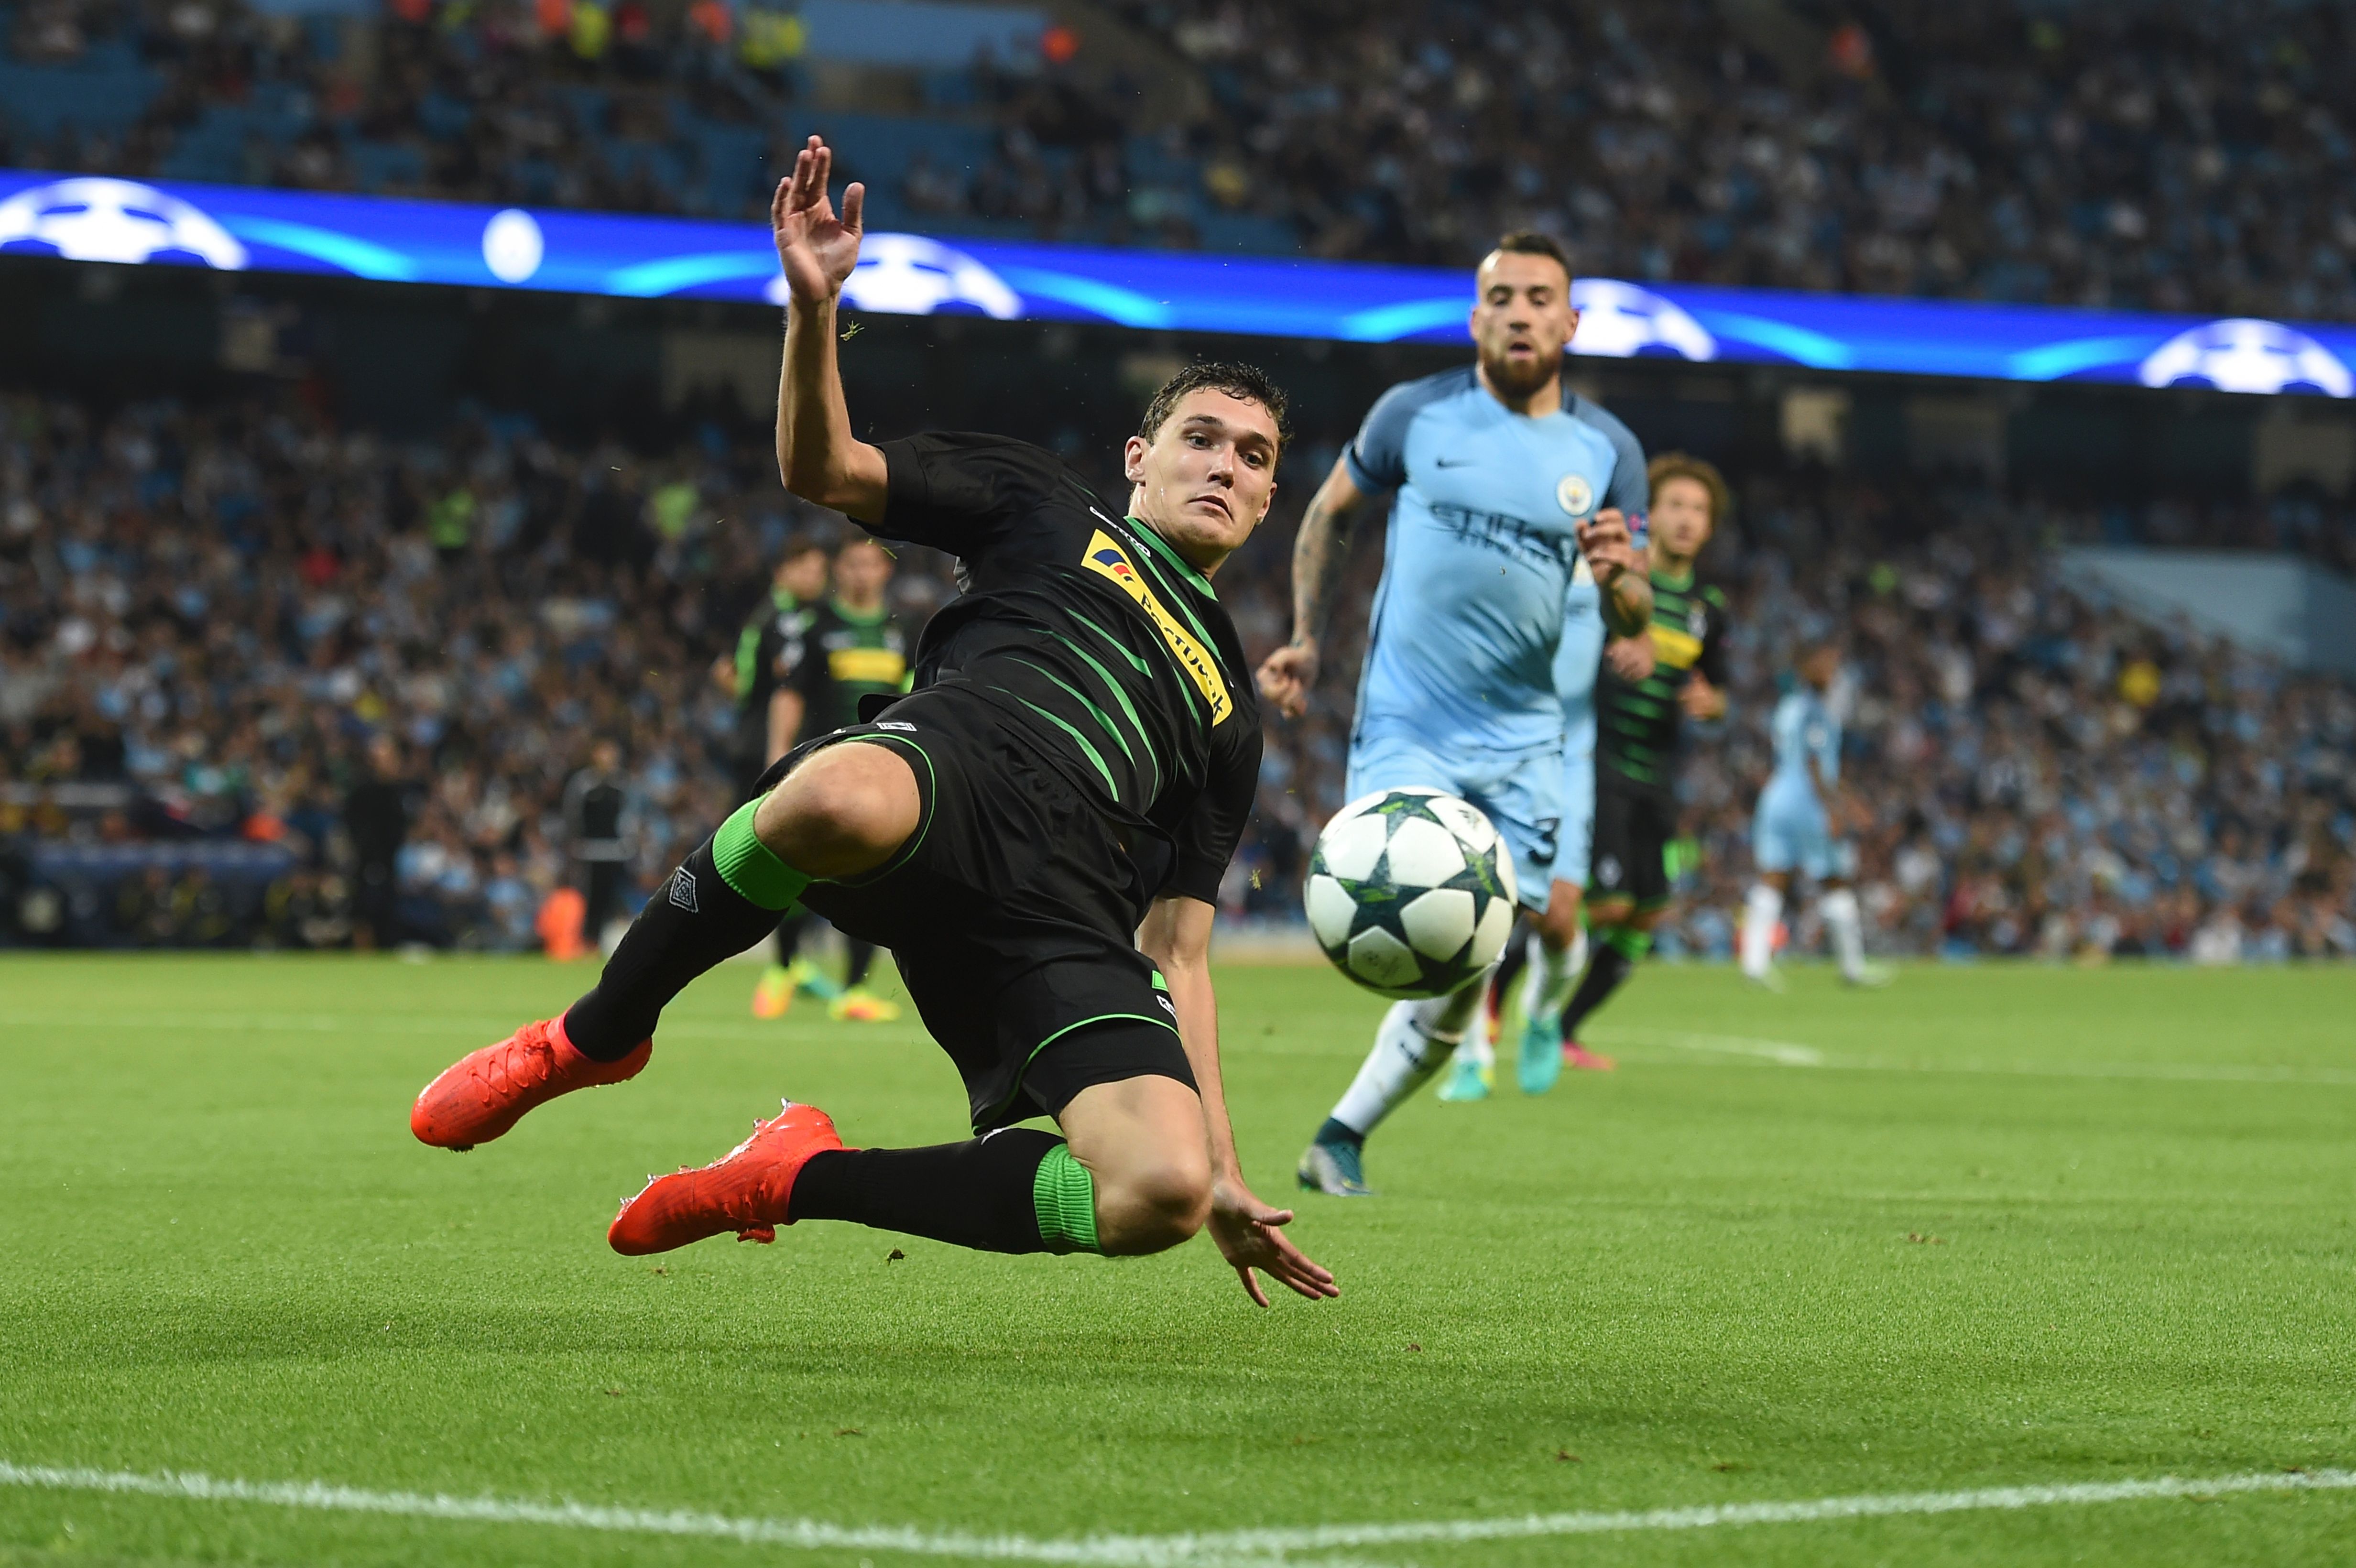 Moenchengladbach's Danish defender Andreas Christensen tries to keep the ball in play during the UEFA Champions League group C football match between Manchester City and Borussia Monchengladbach at the Etihad stadium in Manchester, northwest England, on September 14, 2016. / AFP / PAUL ELLIS        (Photo credit should read PAUL ELLIS/AFP/Getty Images)